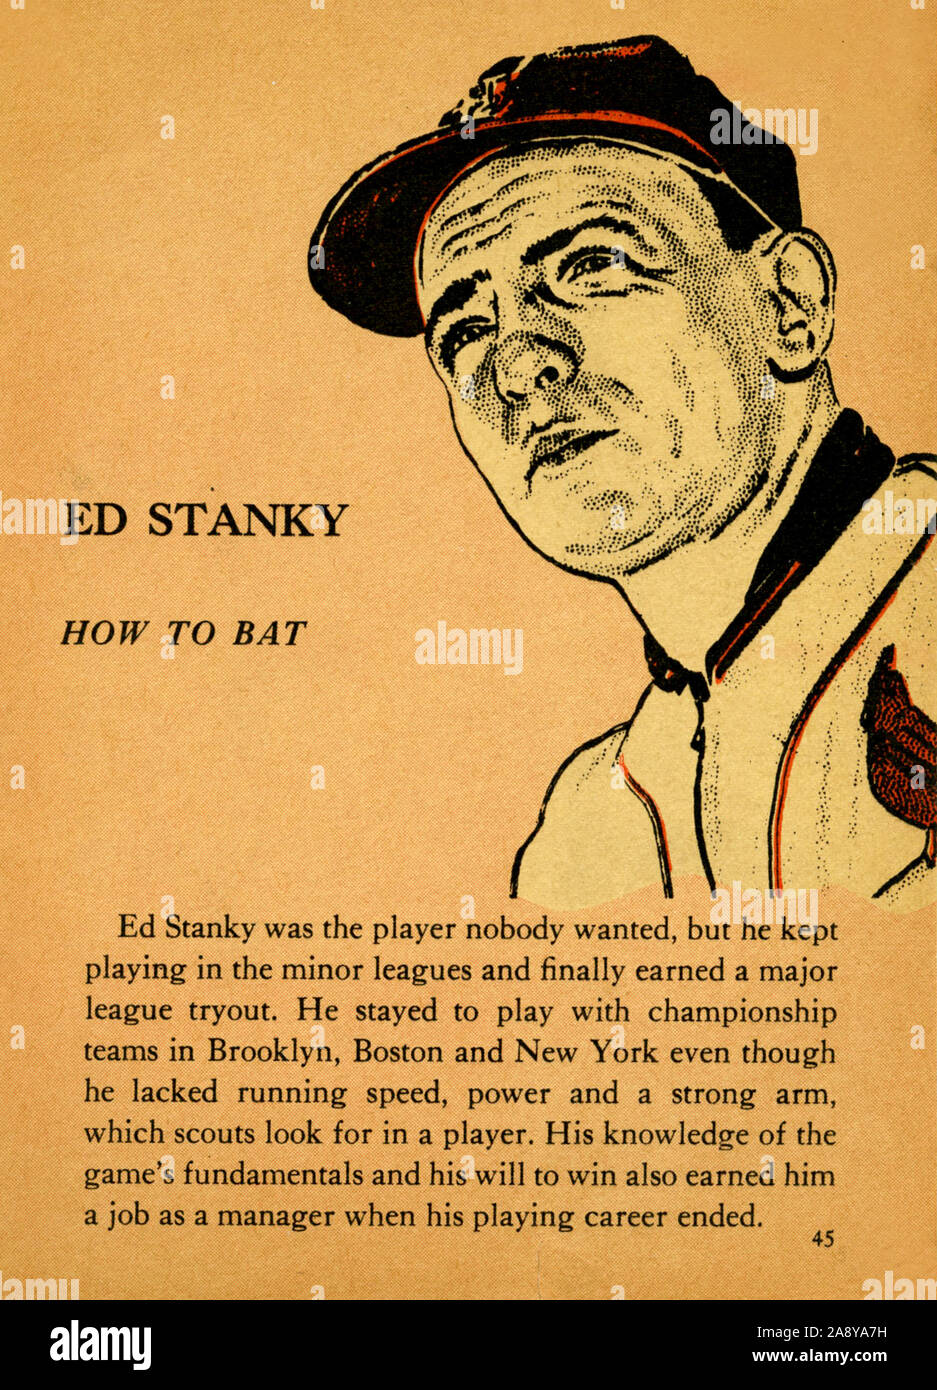 Vintage illustration of baseball player for a pamphlet teaching kids how to play baseball with tips from the pros. Stock Photo